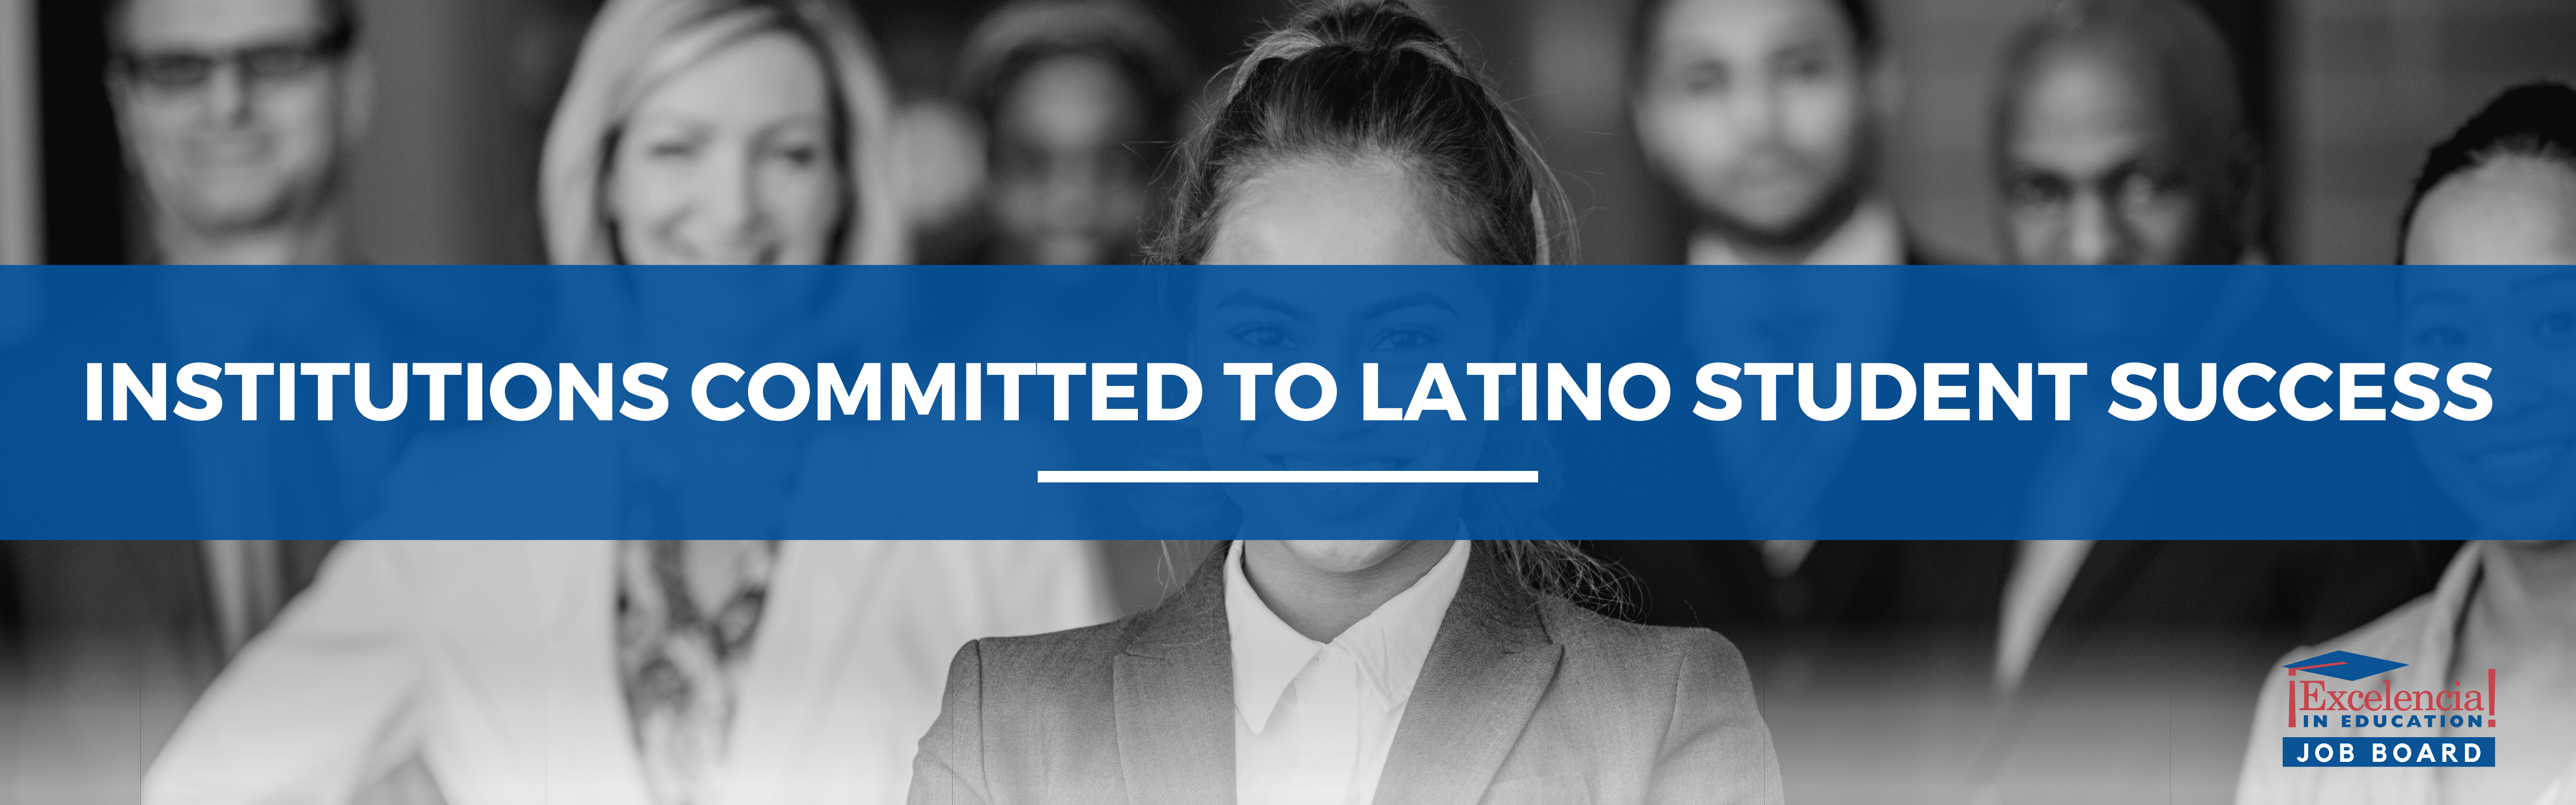 Institutions Committed to Latino Student Success